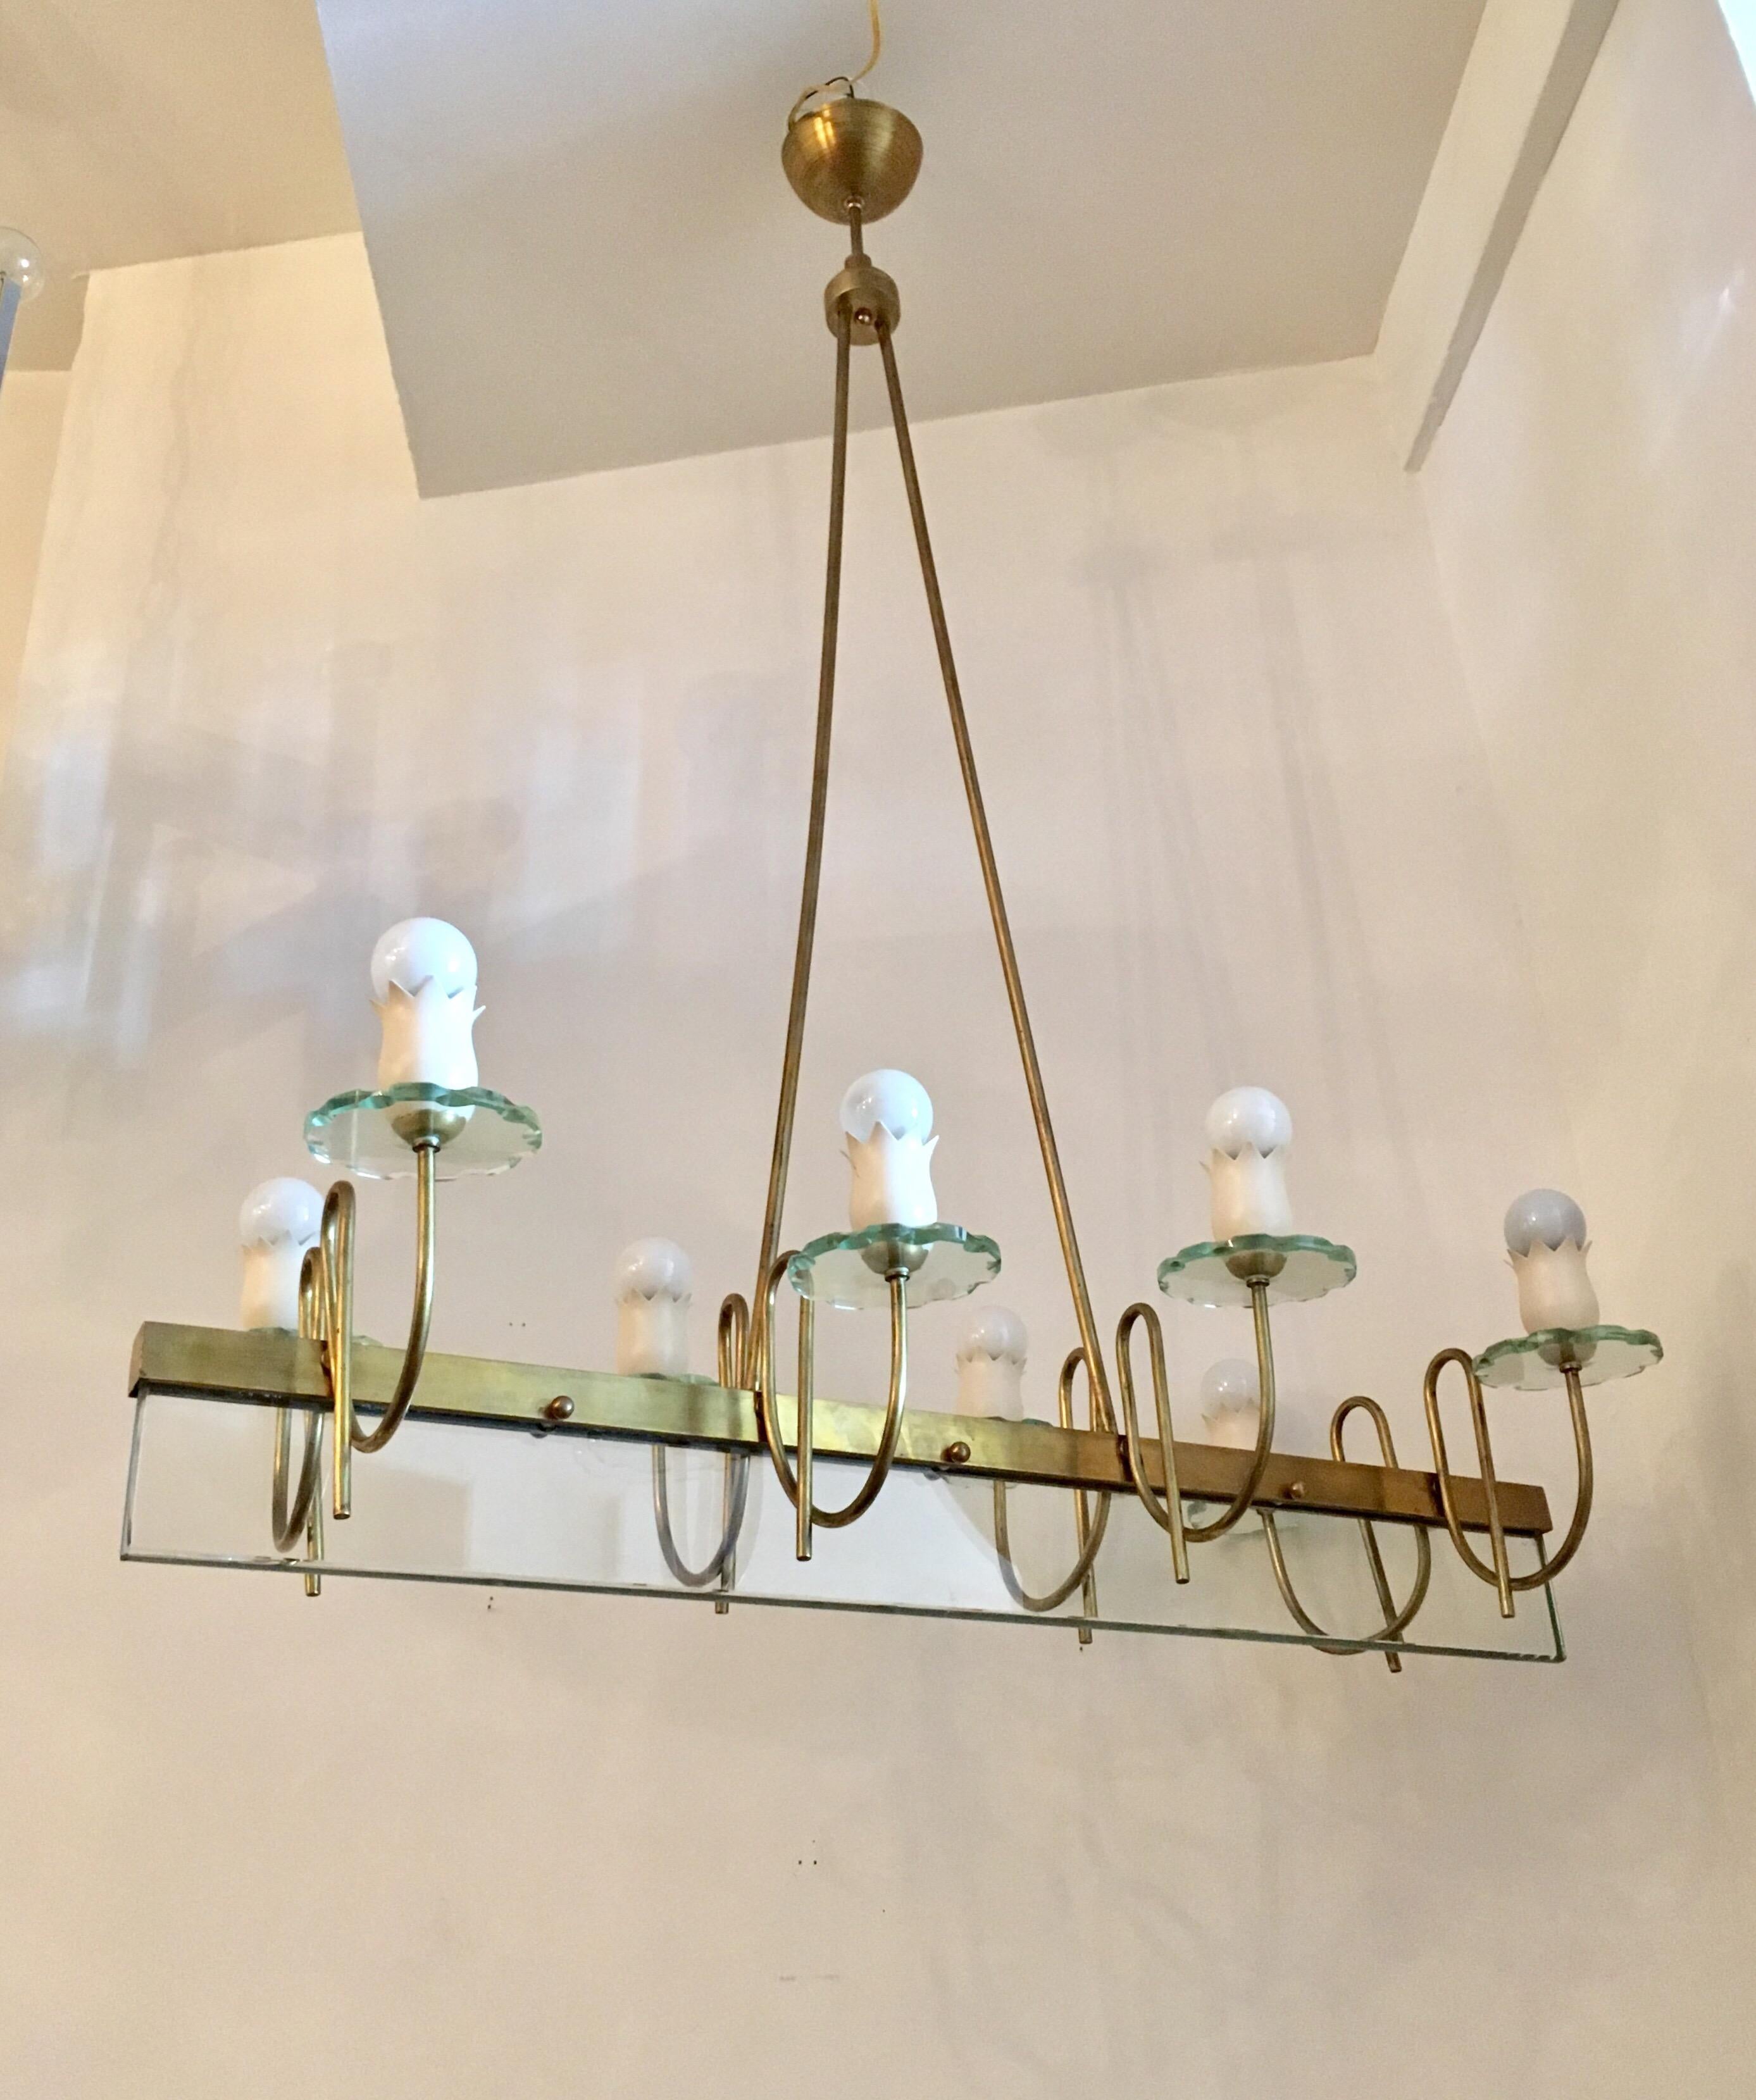 A wonderful all original 1950s Italian chandelier composed of a satin brass and white enamel fixture and fitting with one large cut crystal and eight small hand-cut crystal bobeches. Rewired. In the style of Fontana Arte. The height can be dropped